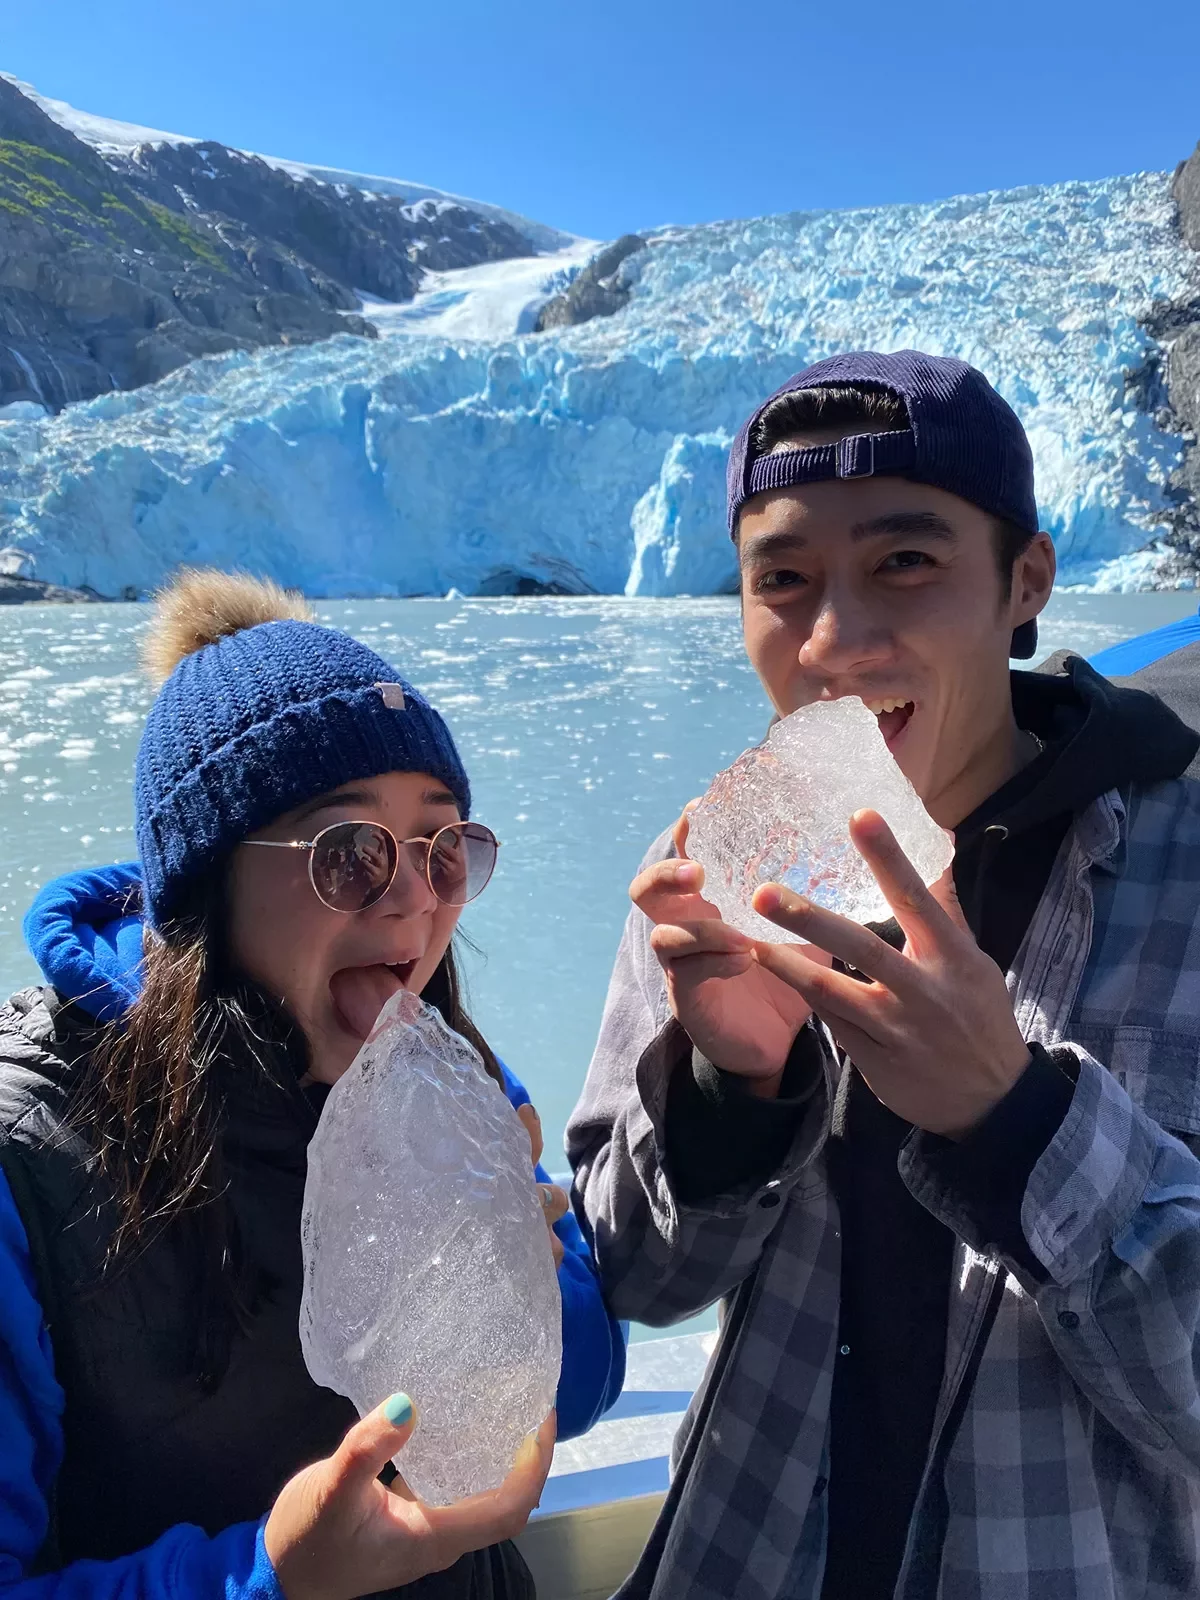 Two guests eating ice in Alaska